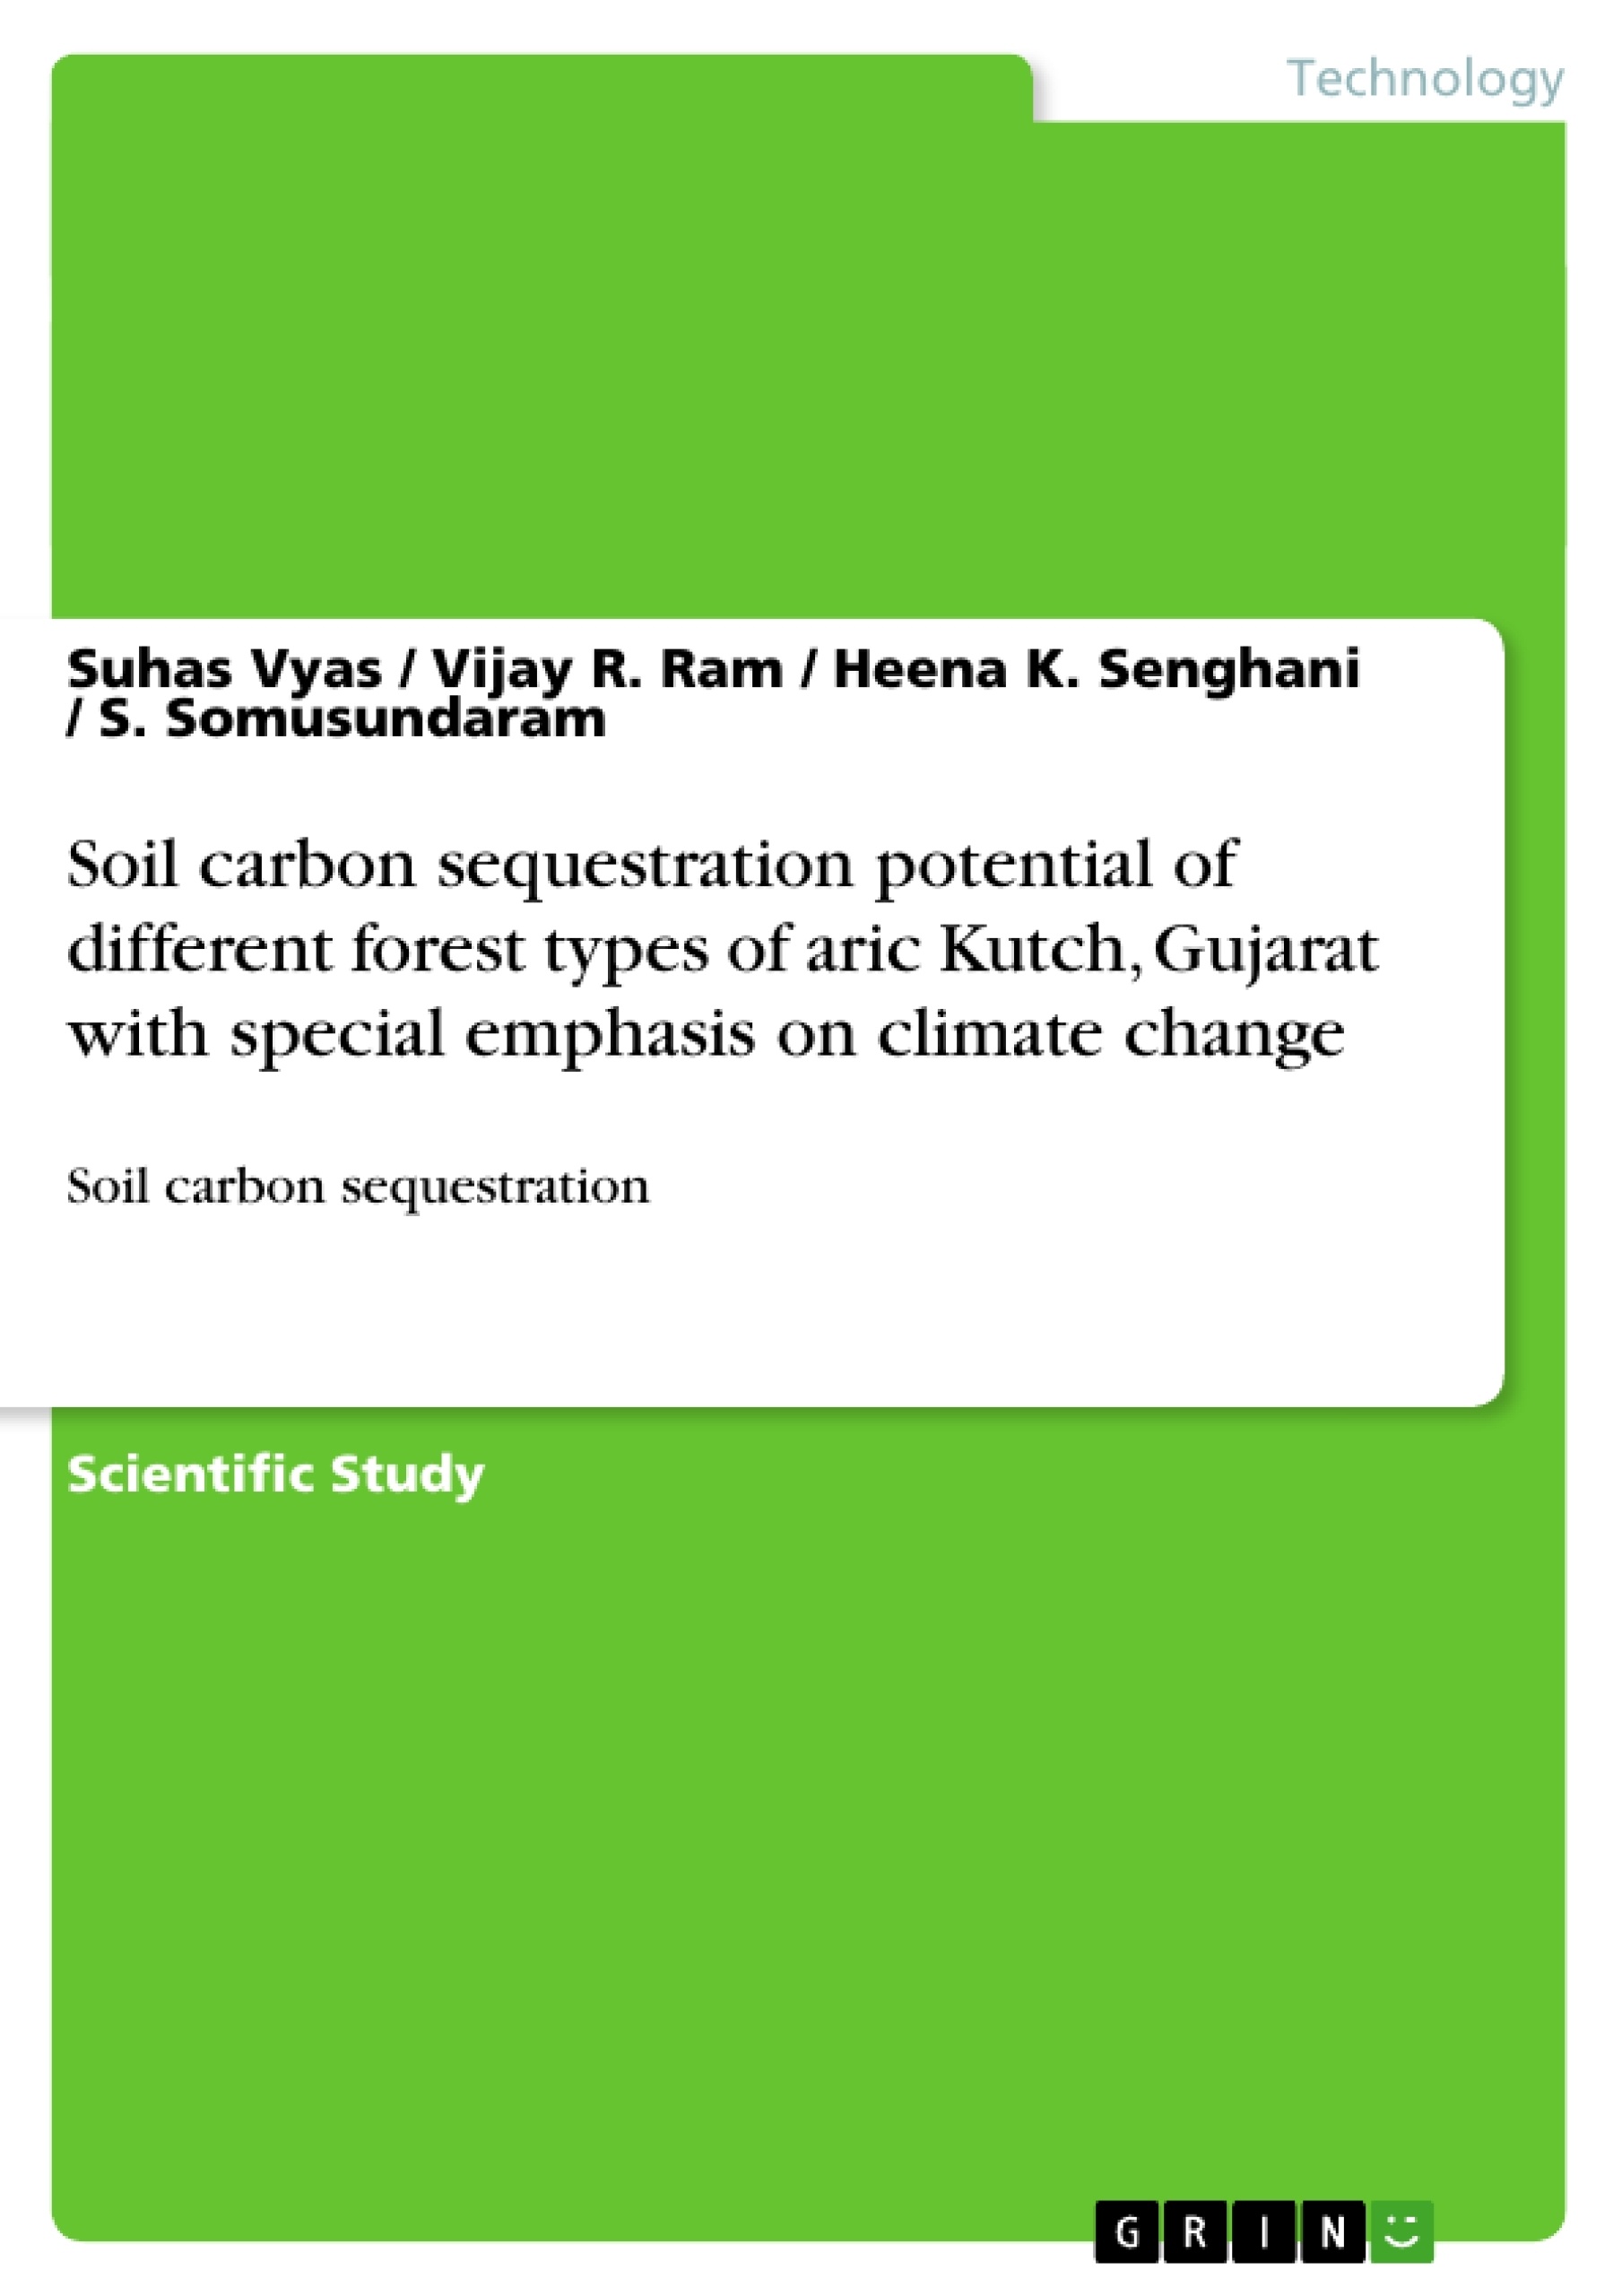 Título: Soil carbon sequestration potential of different forest types of aric Kutch, Gujarat with special emphasis on climate change